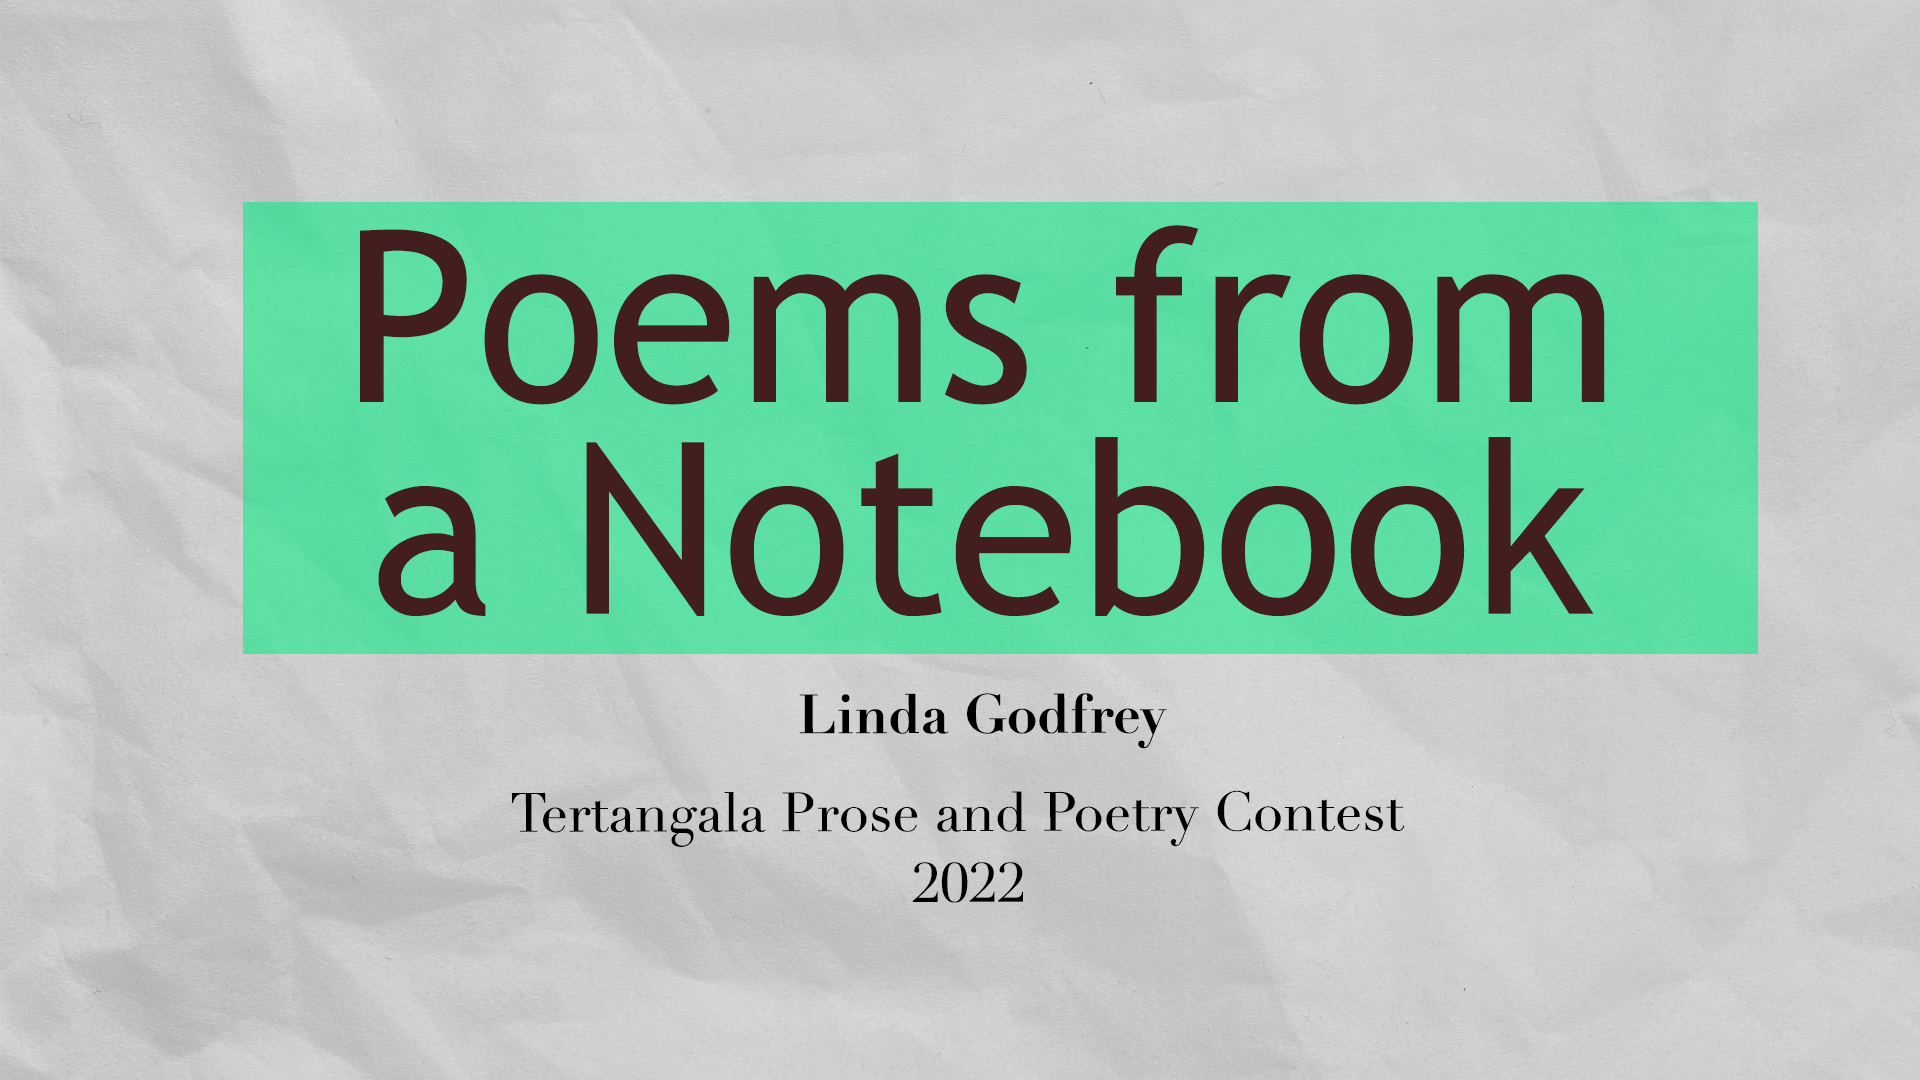 Linda Godfrey – Poems from a Notebook – TTPAPC 2022 Poetry